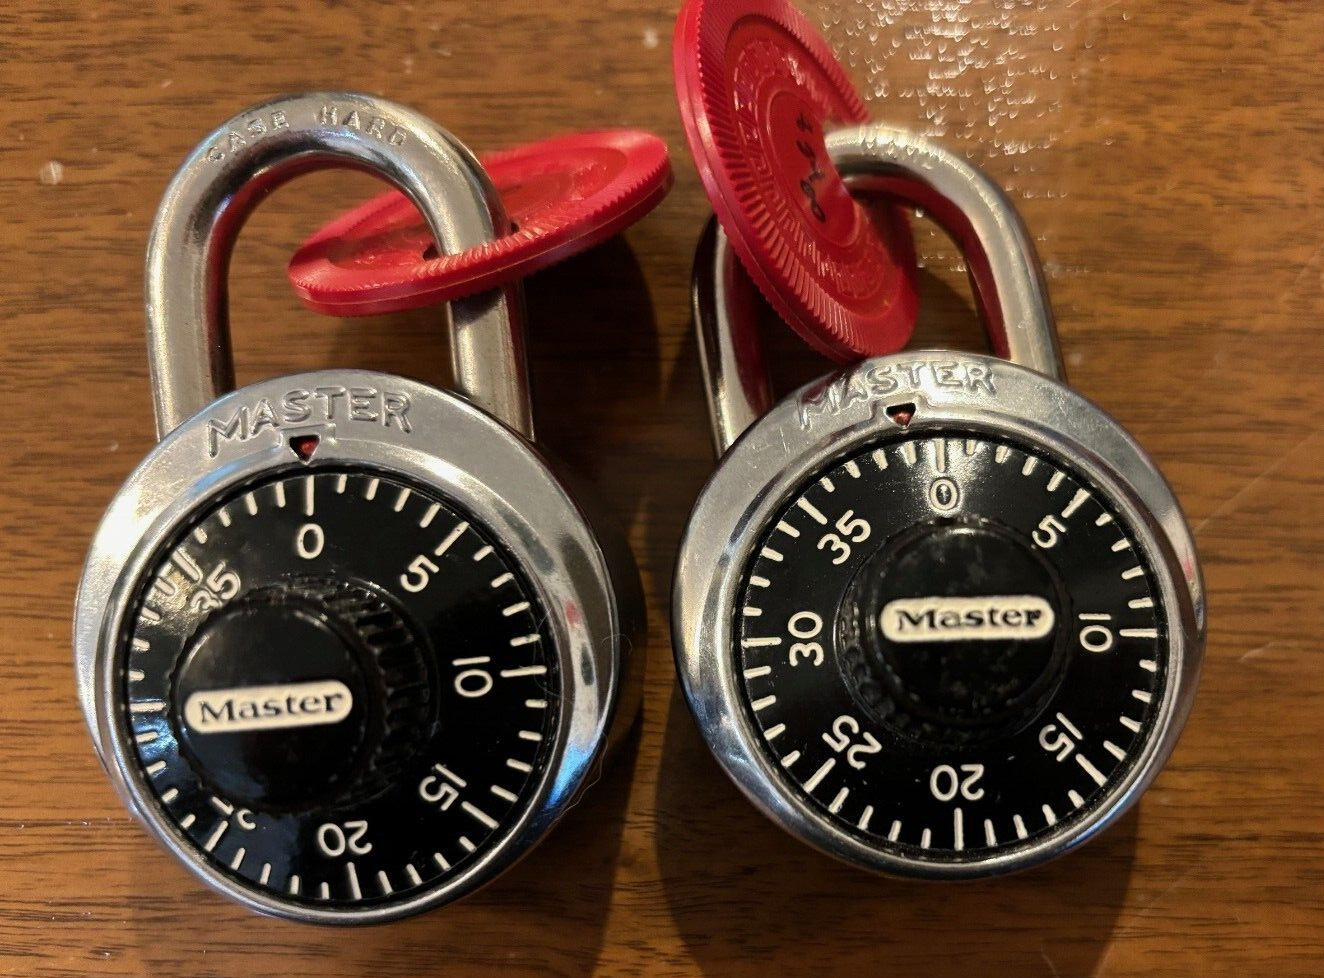 Set of 2 Vintage Master Combination Locks with combinations